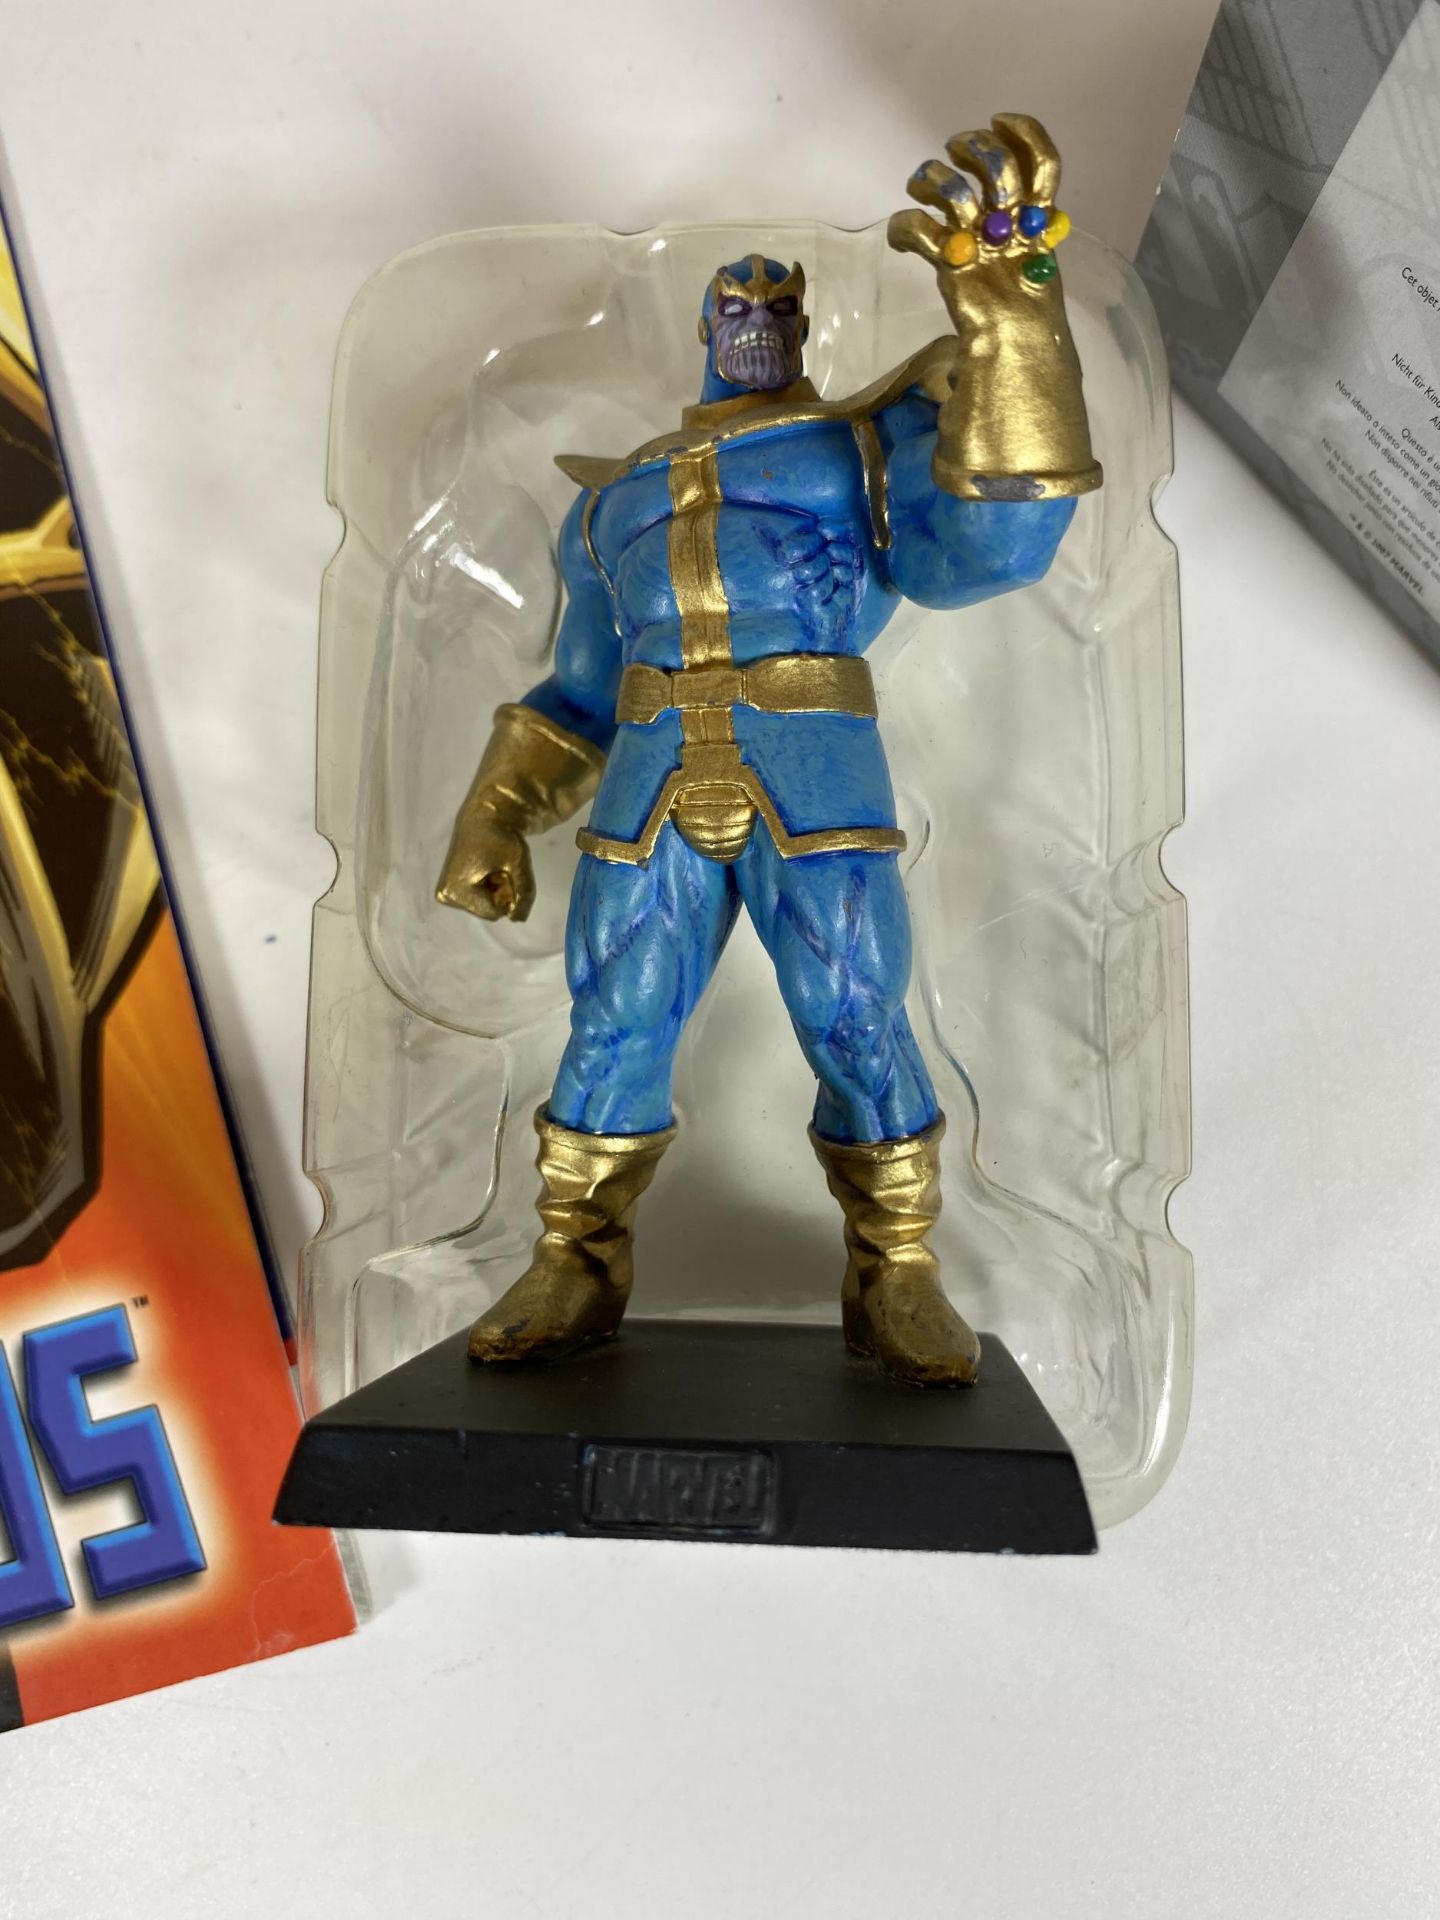 A MARVEL CLASSIC LEAD SPECIAL COLLECTORS FIGURE - THANOS WITH MAGAZINE - Image 4 of 5